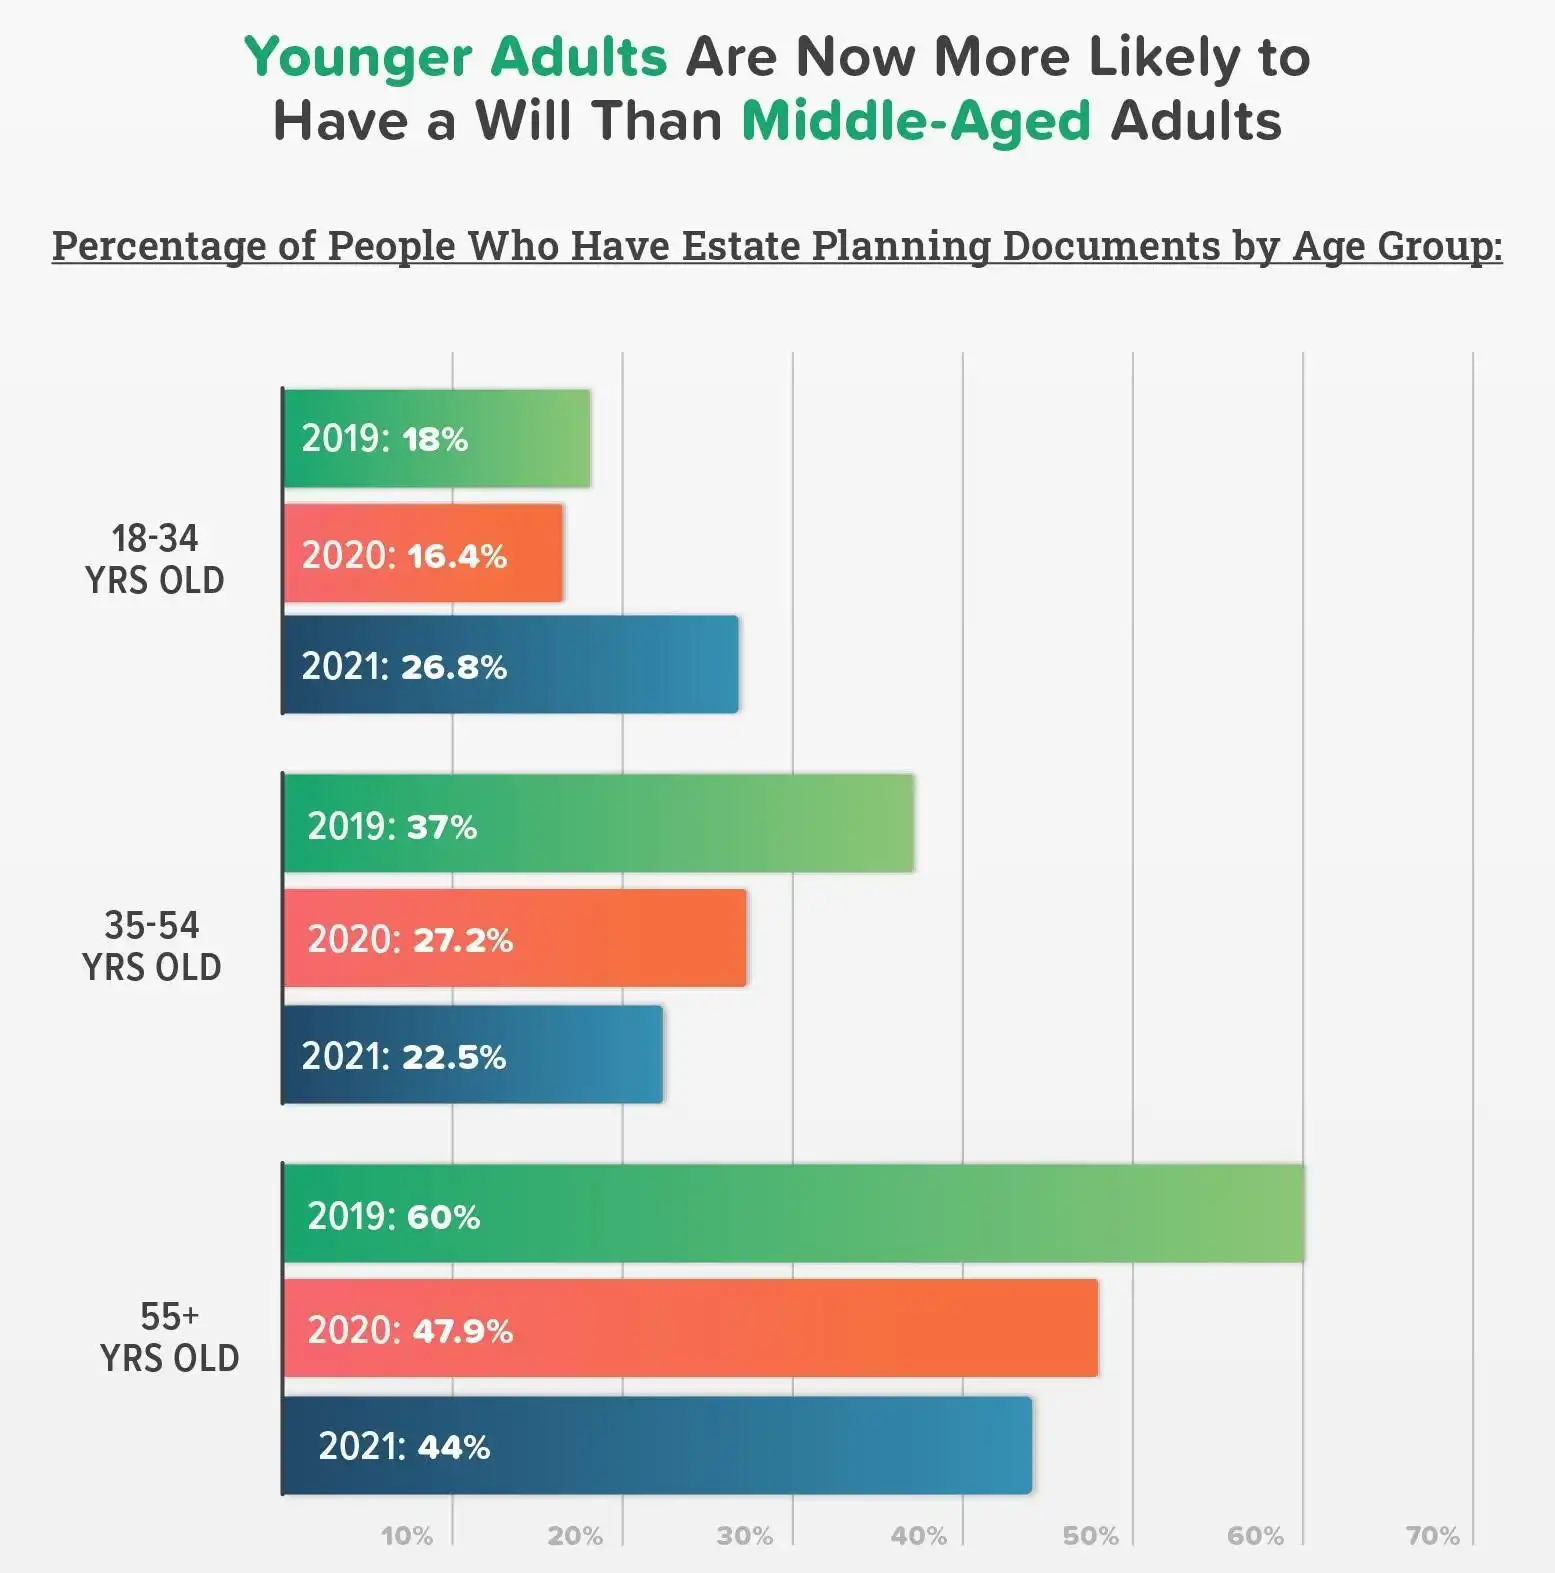 Infographic 10 - Percentage of people who have estate planning documents by age group